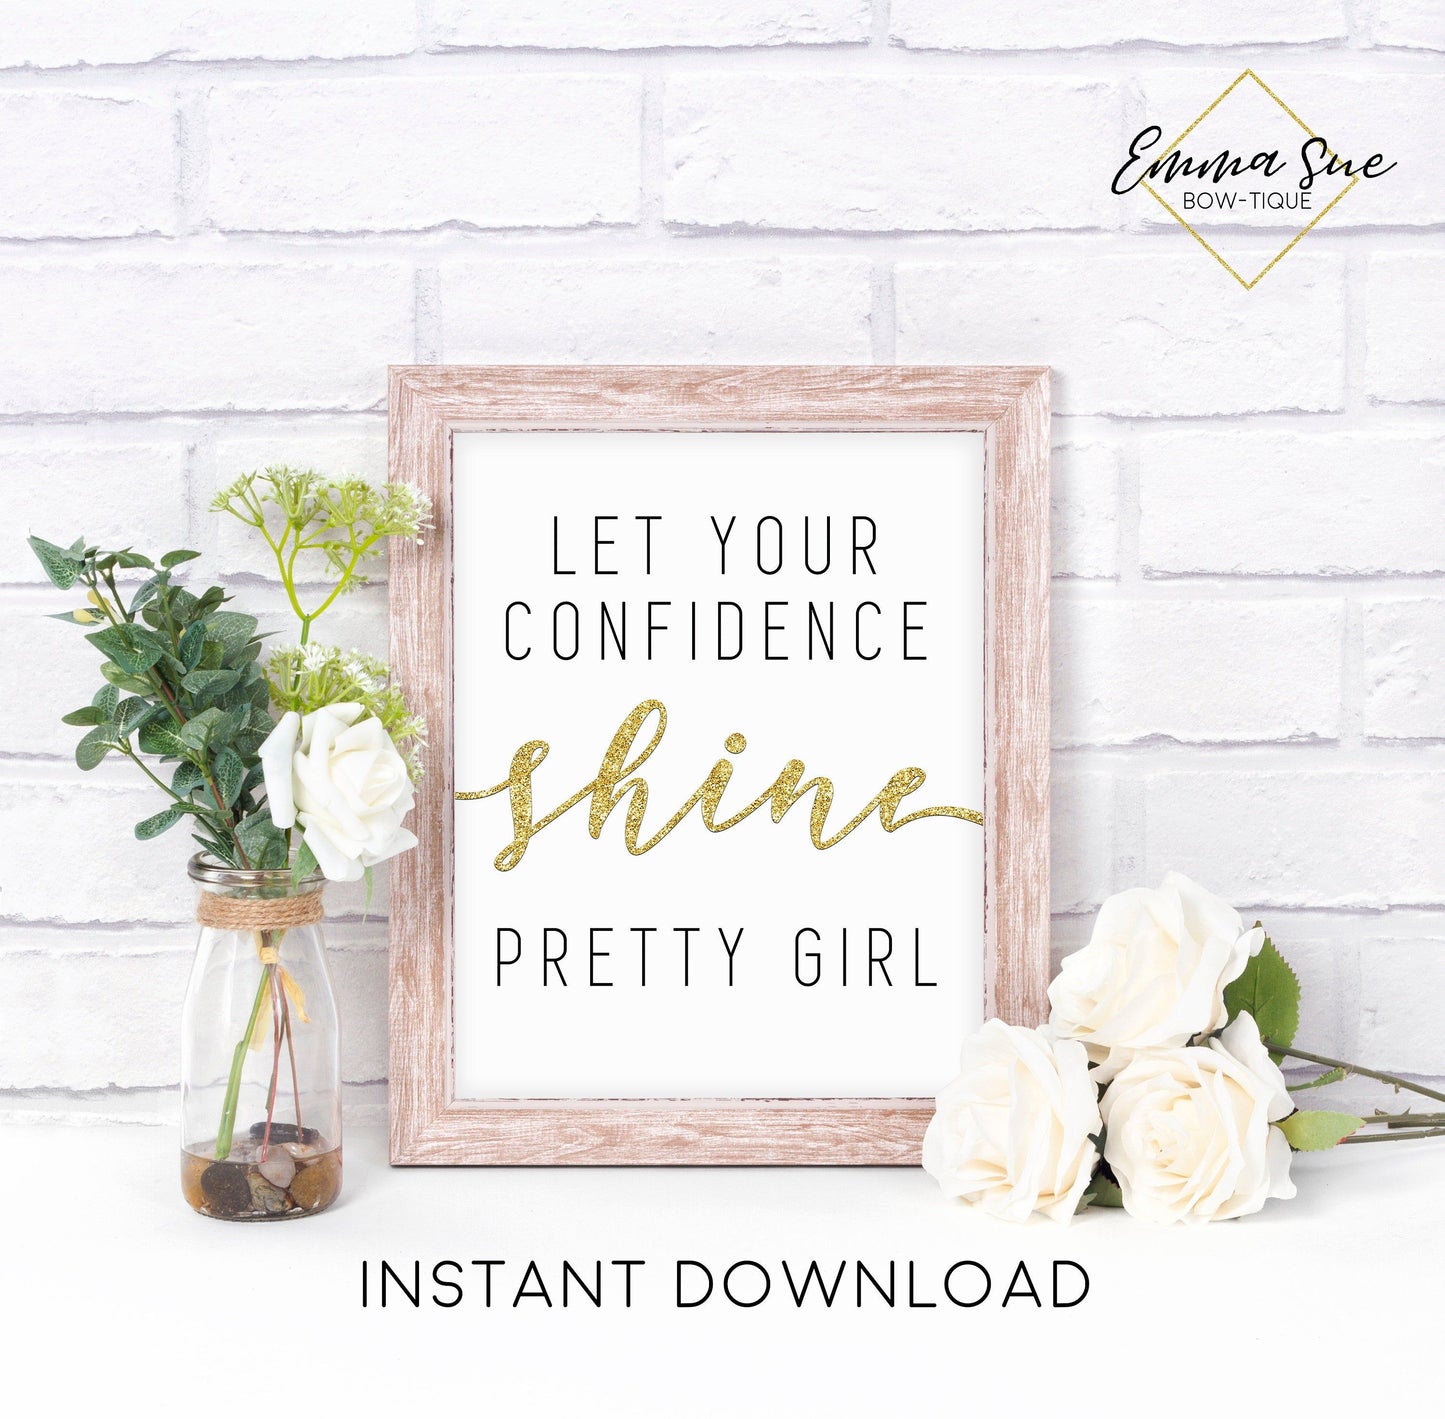 Let your confidence shine pretty girl - Confidence Home Office Motivational Quote Printable Sign Wall Art Digital File